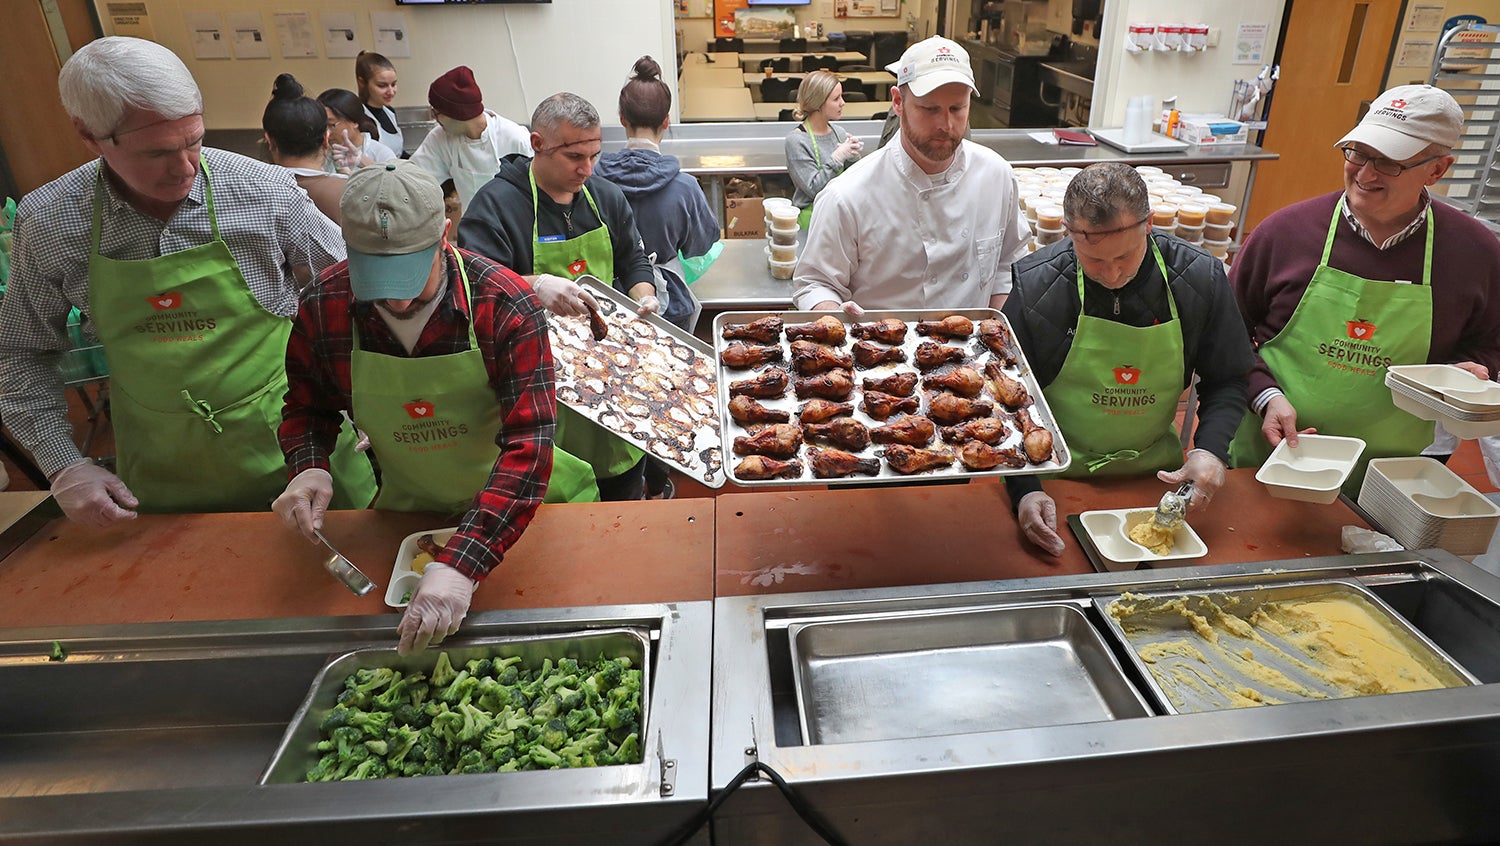 Community Servings volunteers prepare medically tailored meals to be delivered to patients with complex dietary needs.